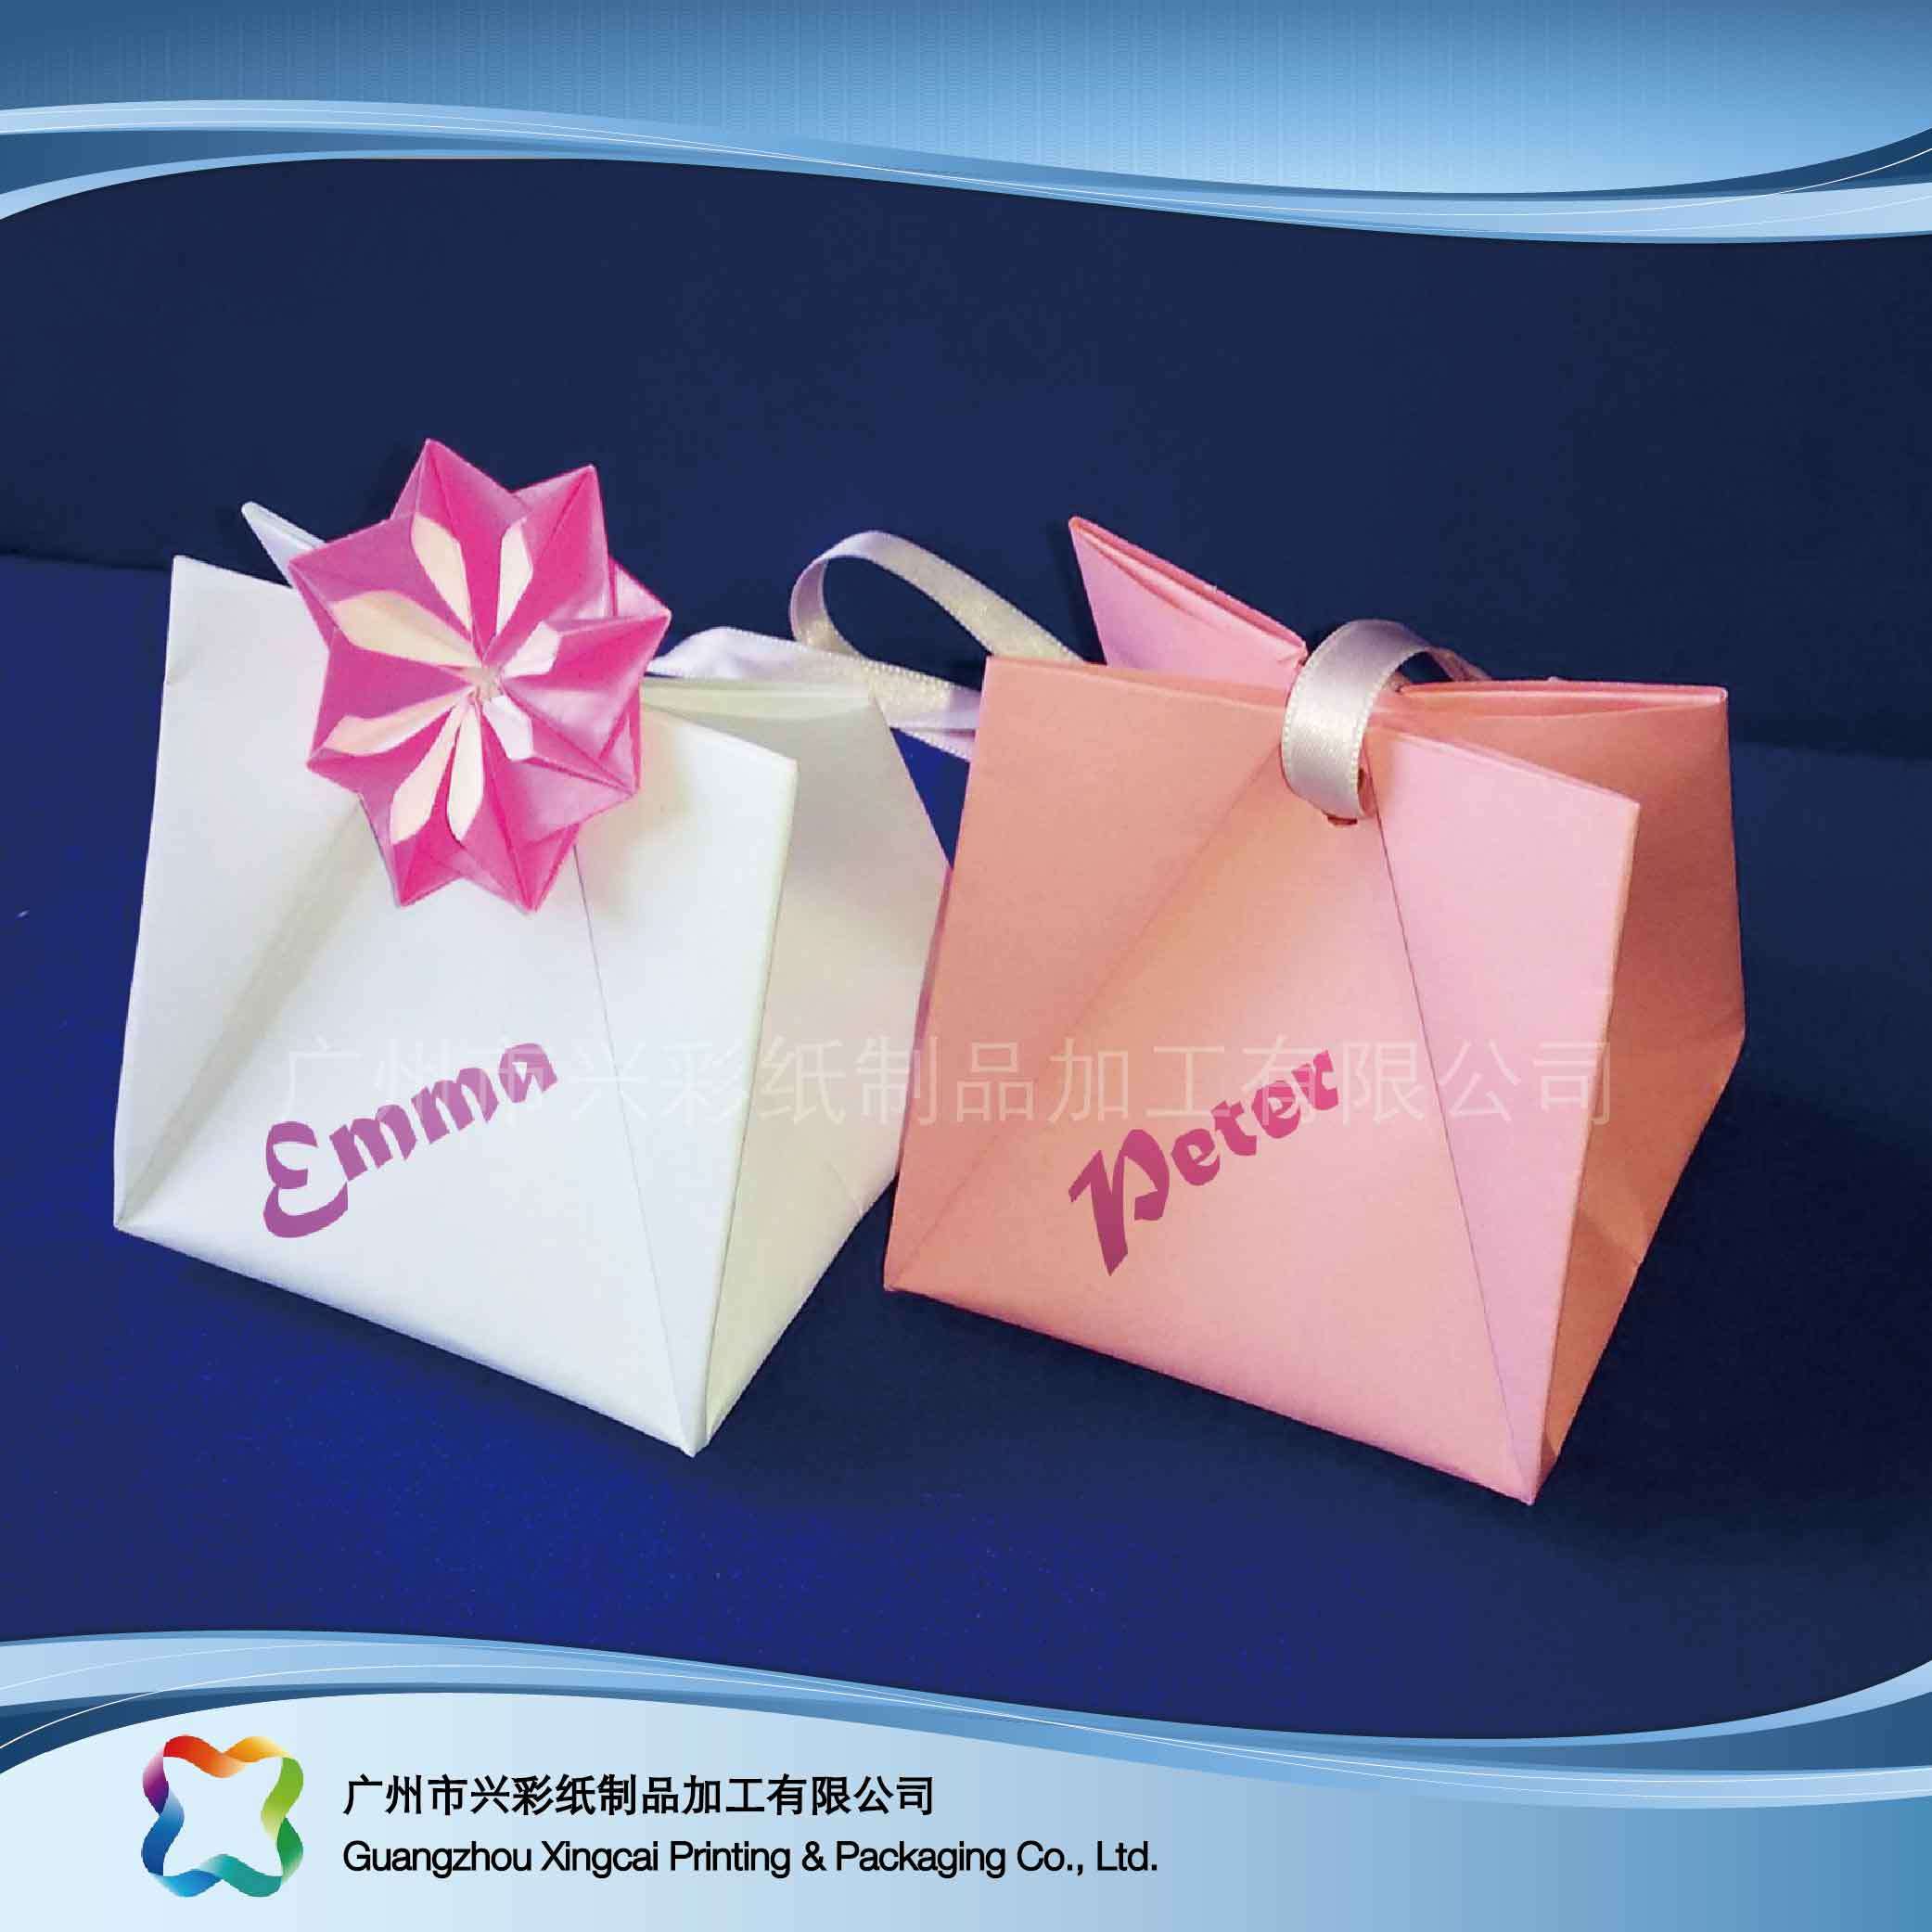 Printed Paper Packaging Carrier Bag for Shopping/ Gift/ Clothes (XC-bgg-024)